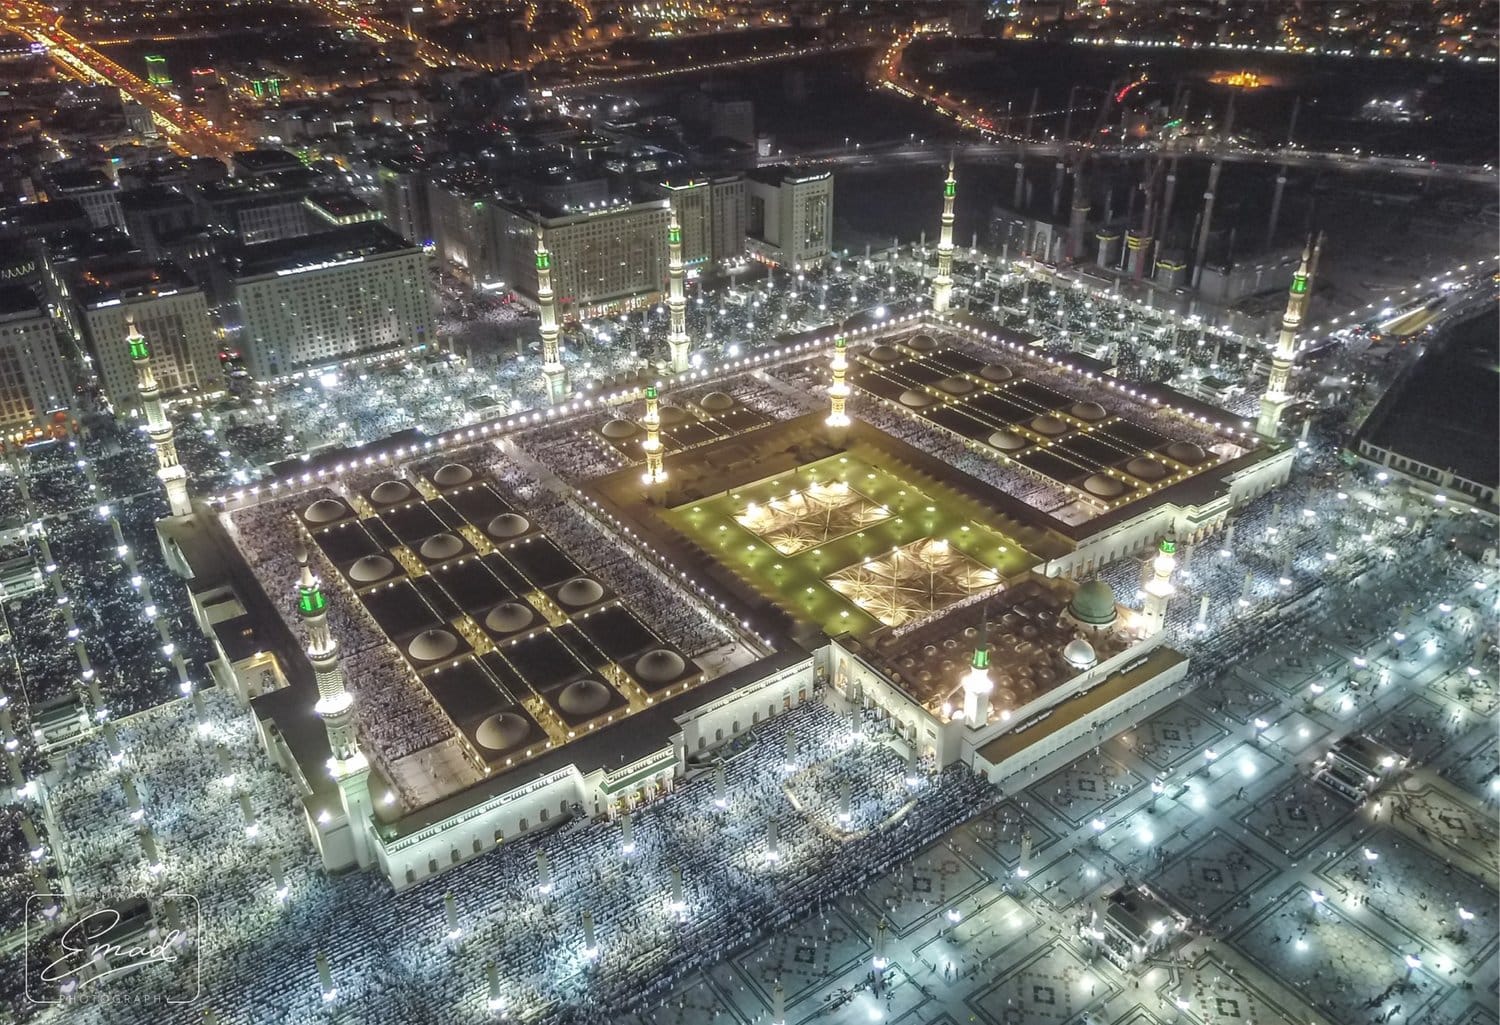 Pilgrims at Makkah empowered by the notoriety from WHO